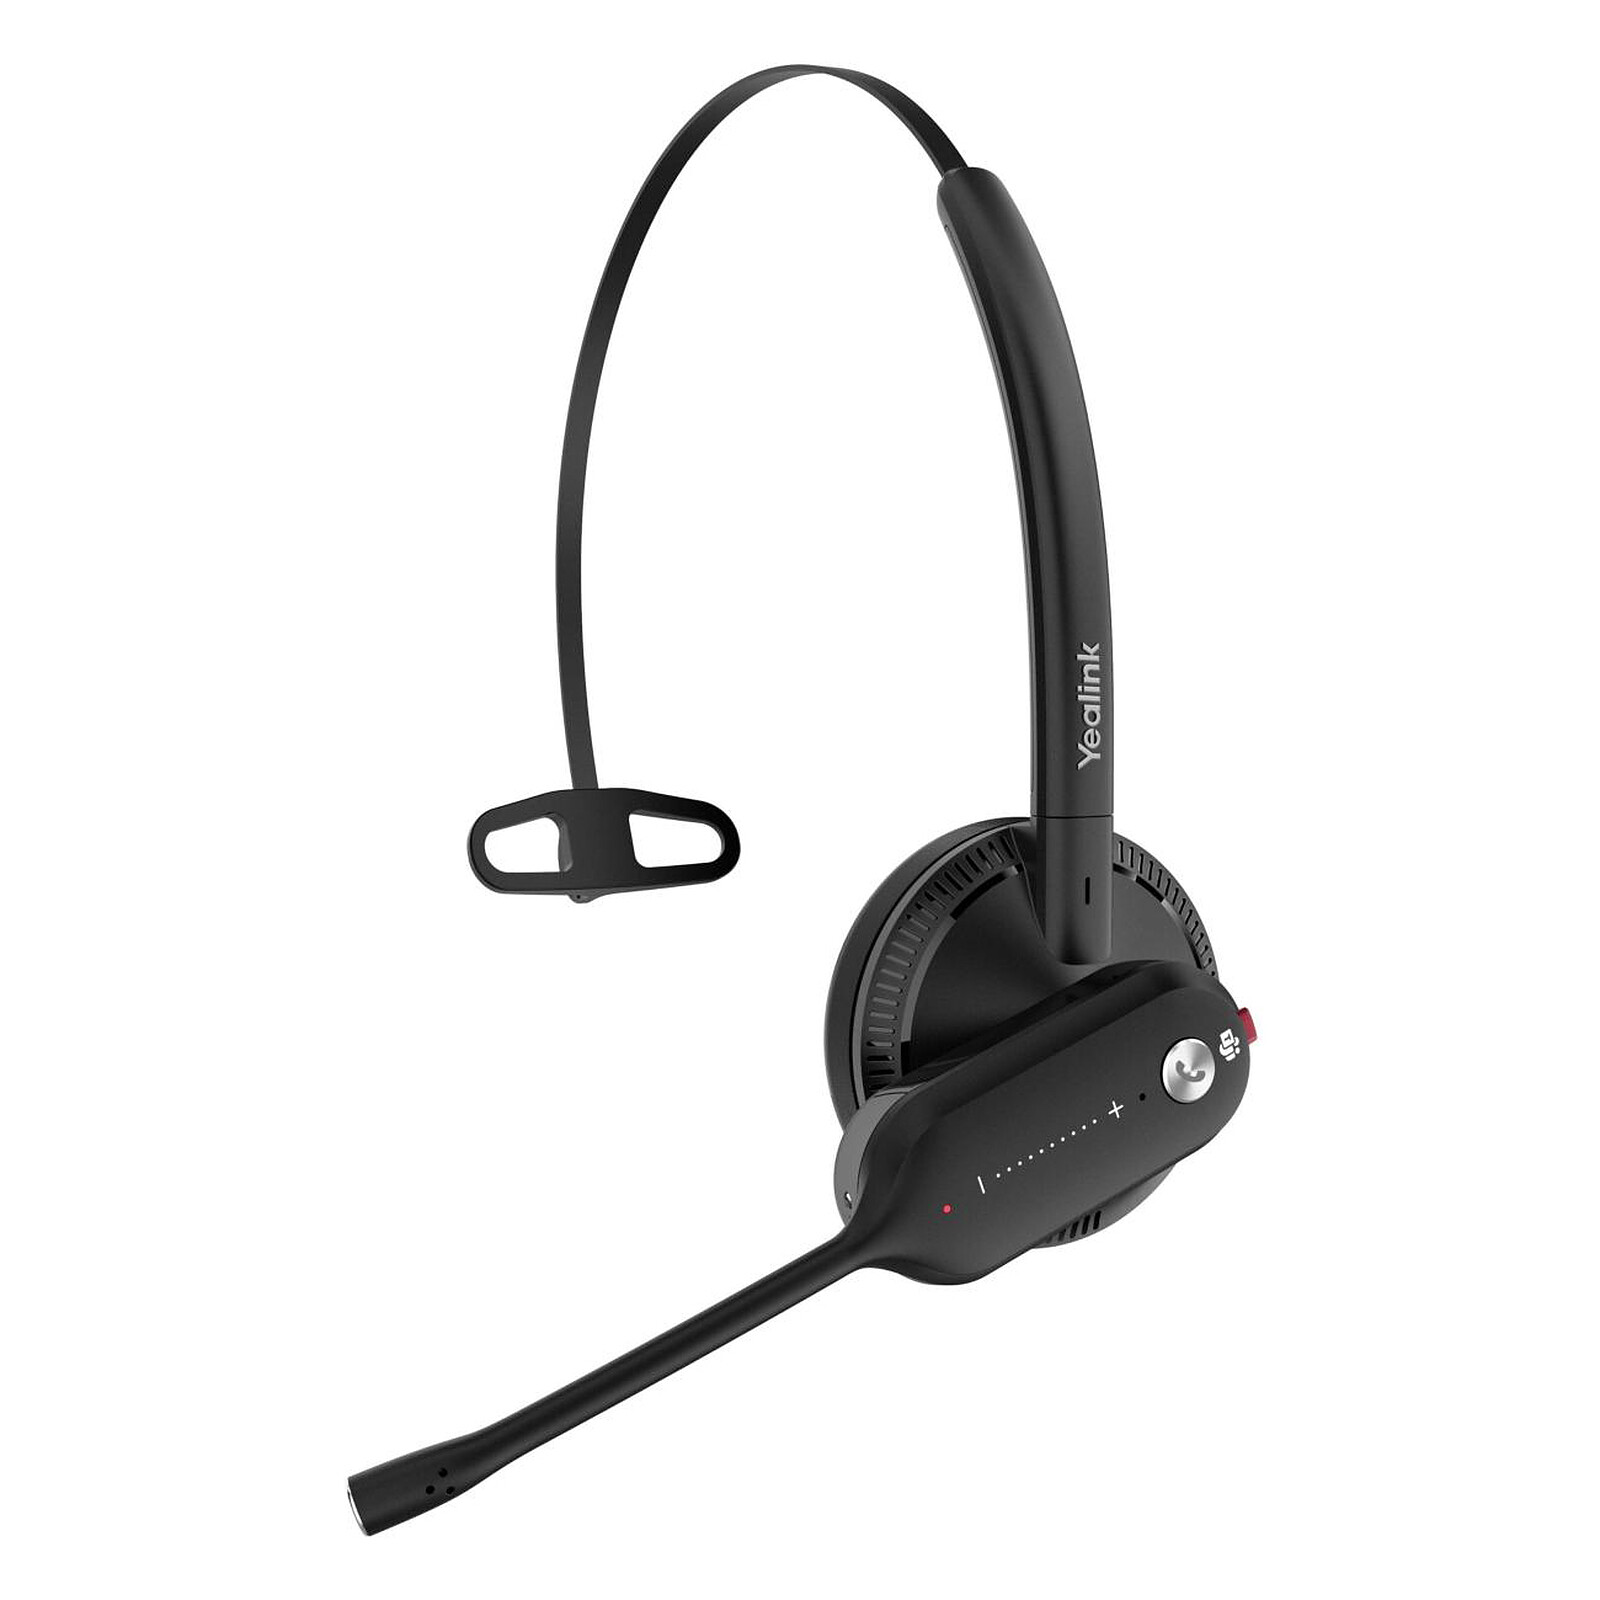 WH63 warranty - - LDLC Teams Yealink Headset 3-year